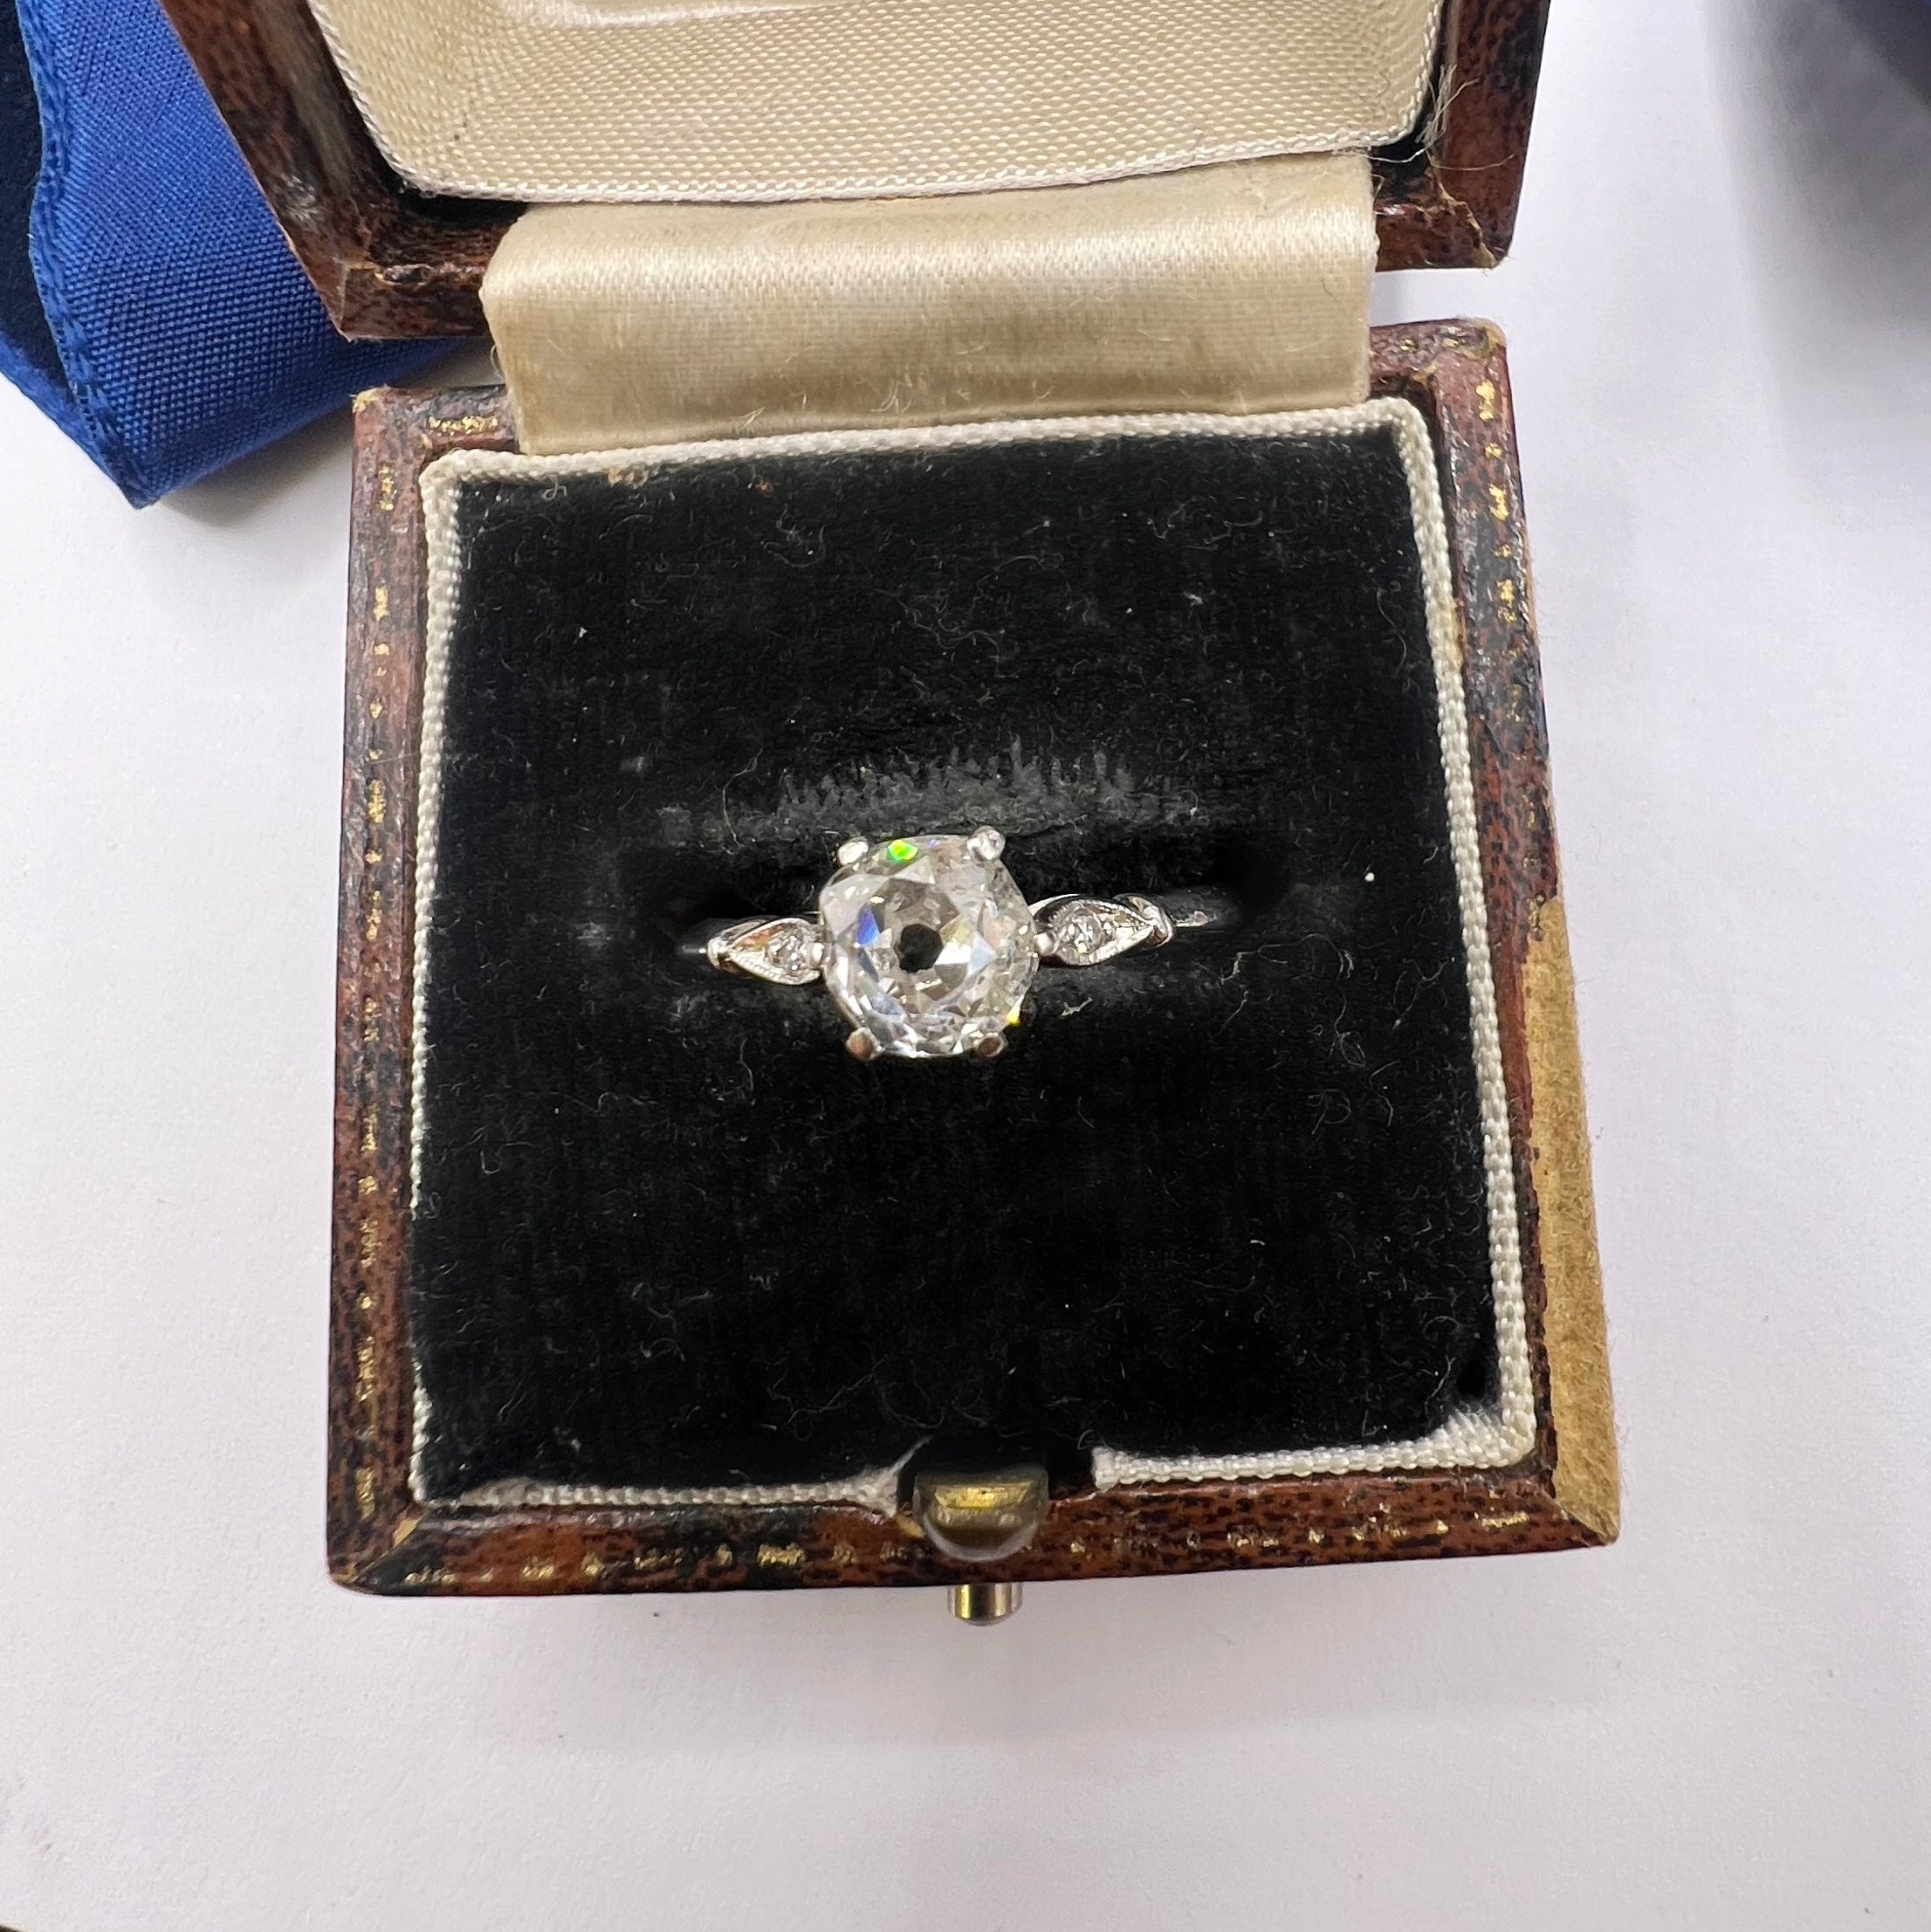 Antique 0.75ct Old Cut Diamond Solitaire Ring